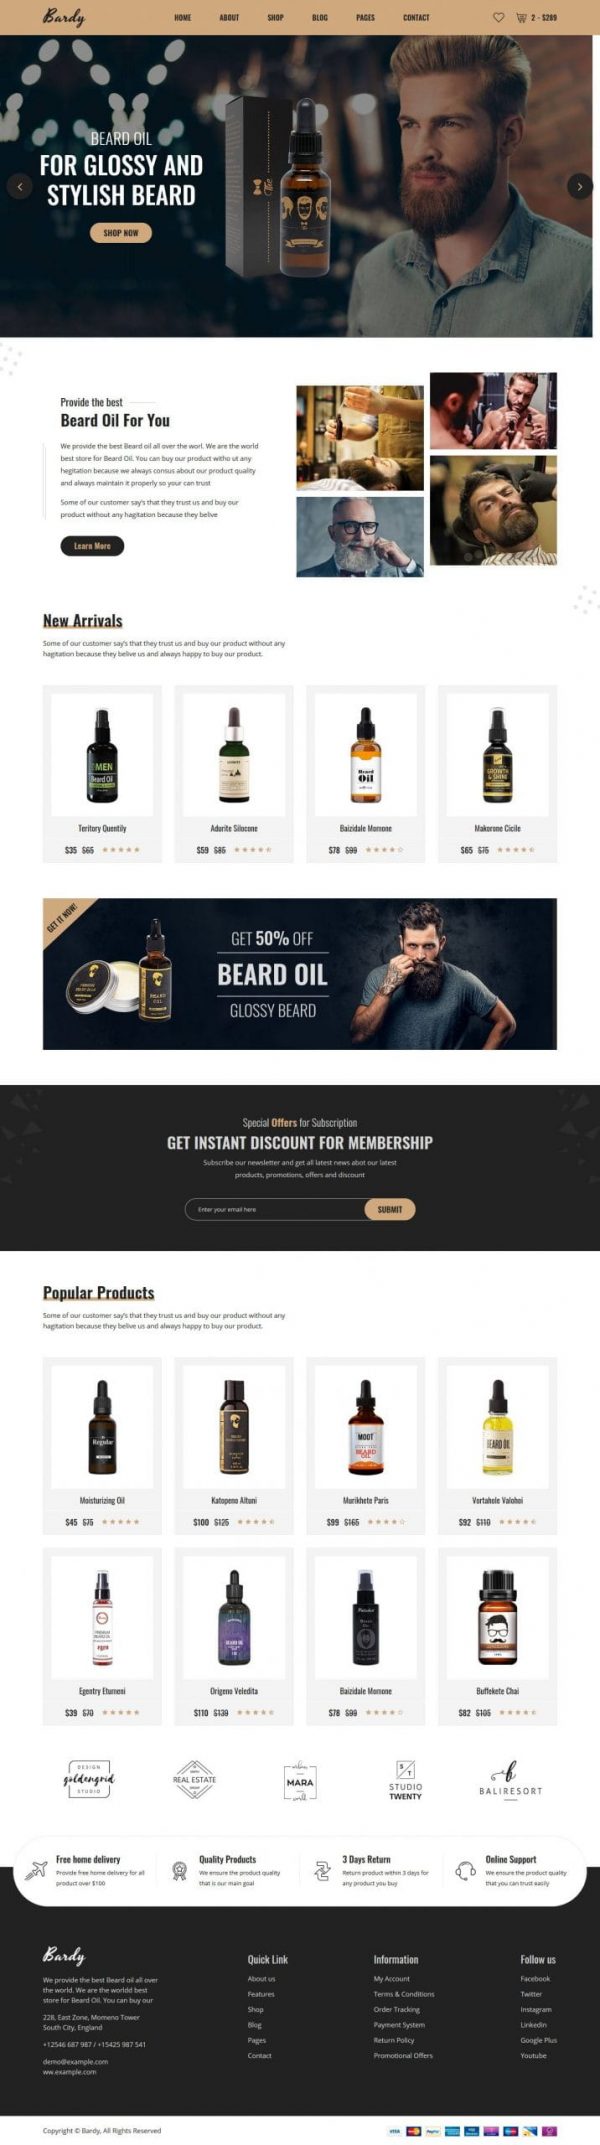 Bardy - Beard Oil eCommerce Bootstrap 4 template